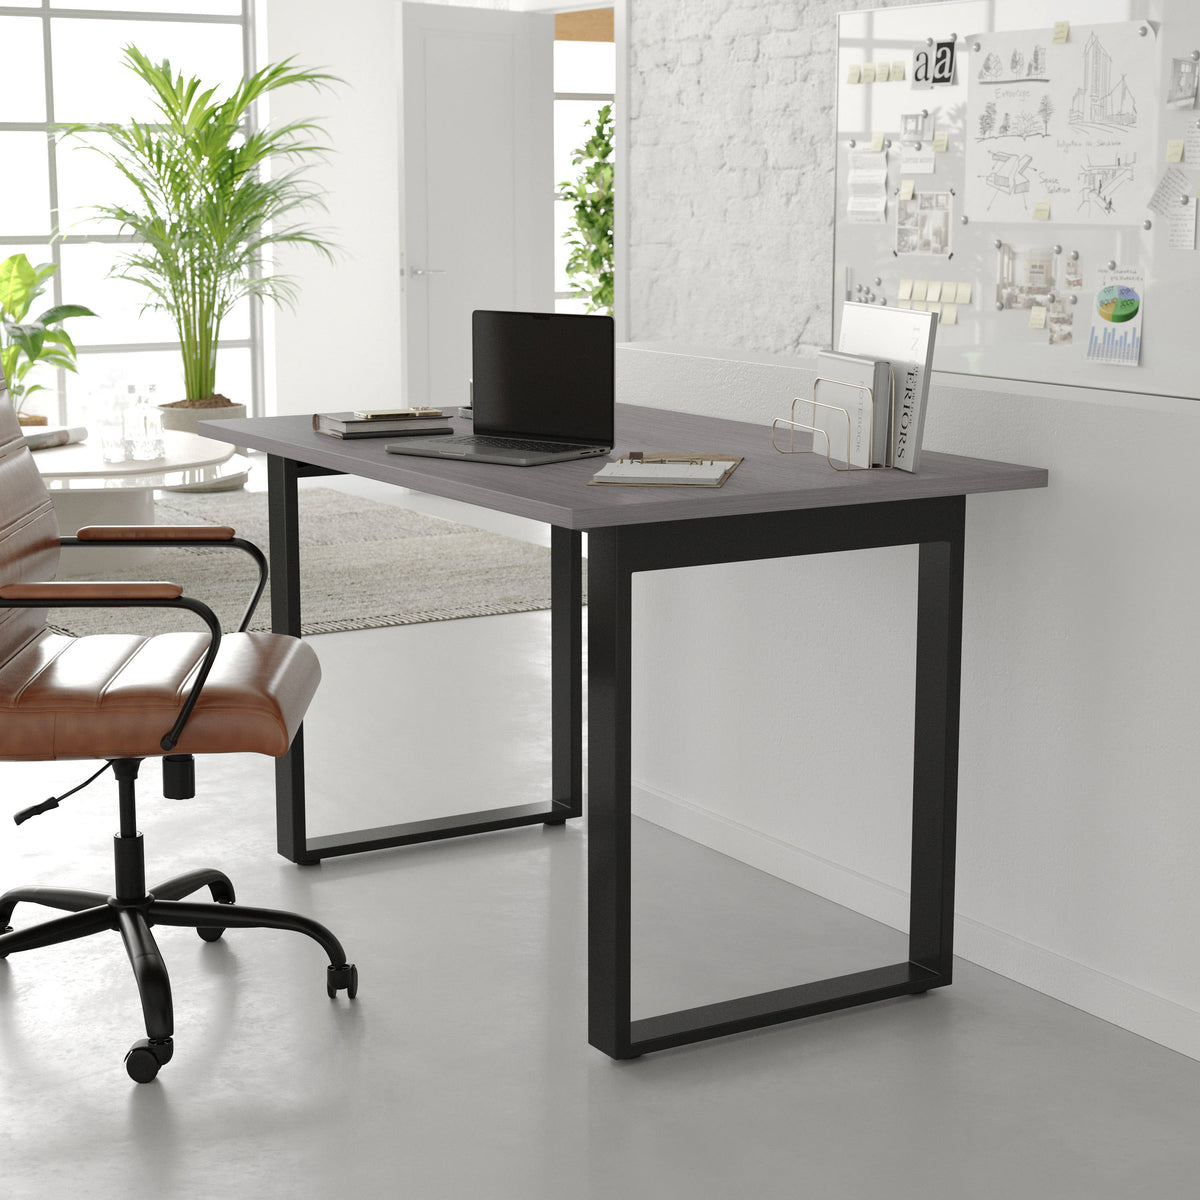 Gray Oak |#| Commercial 48x30 Conference Table with Laminate Top and U-Frame Base - Gray Oak